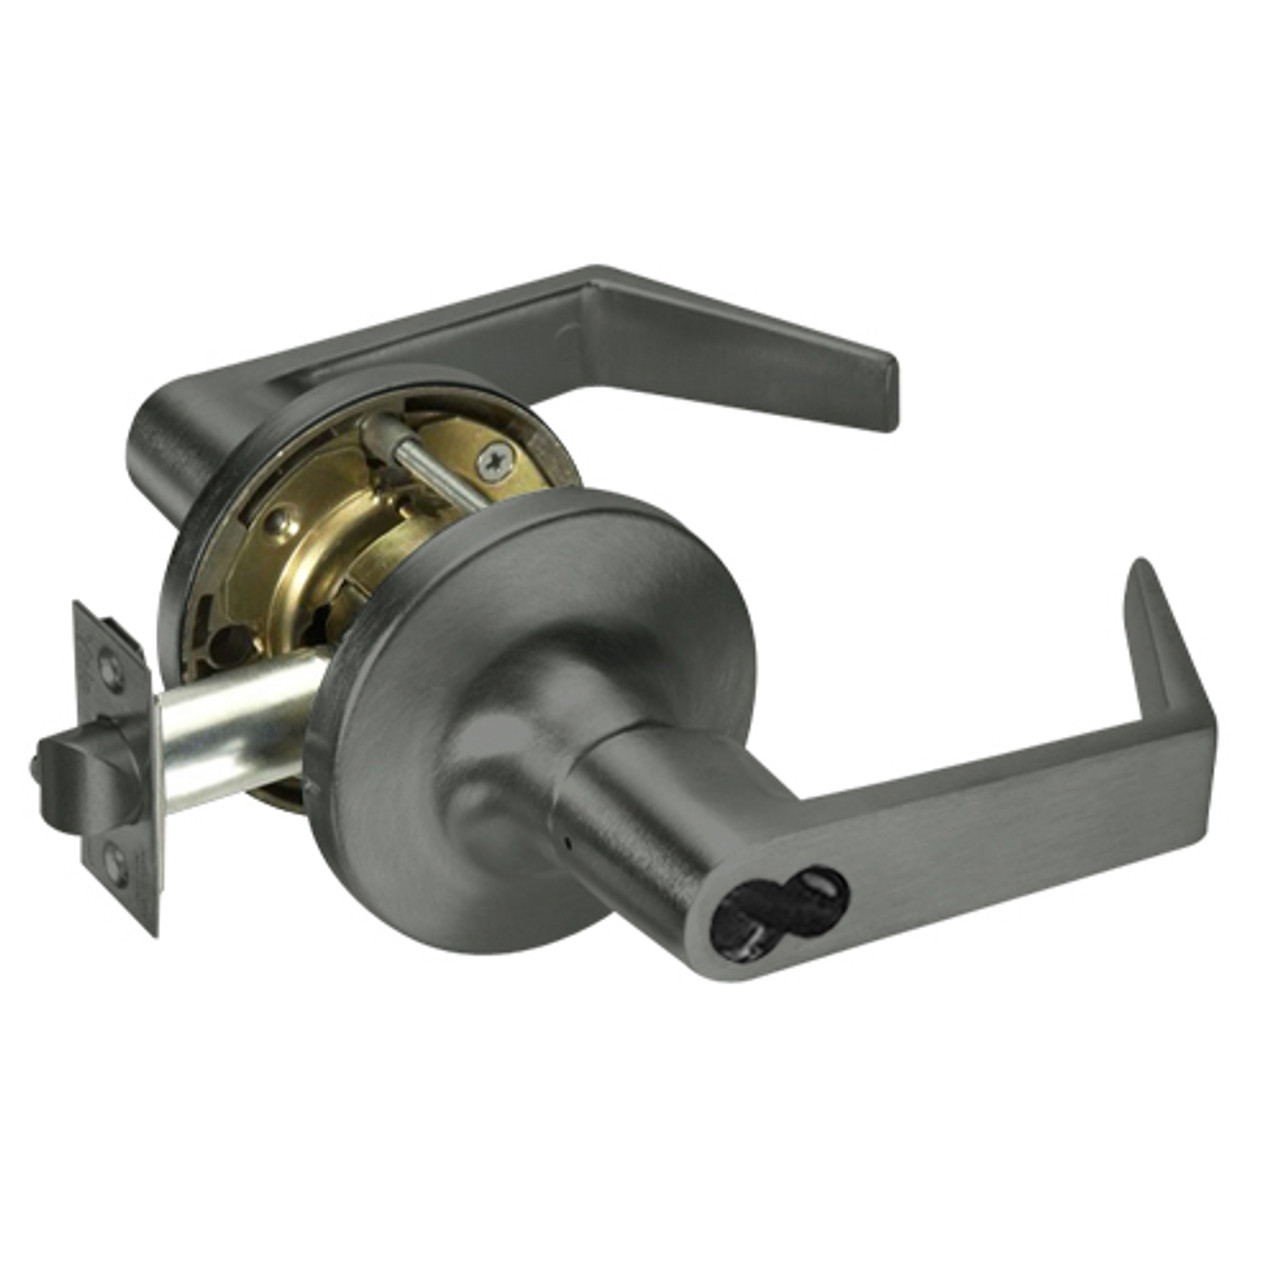 M-AU5405LN-620 Yale 5400LN Series Single Cylinder Storeroom or Closet Cylindrical Locks with Augusta Lever Prepped for Medeco-ASSA IC Core in Antique Nickel